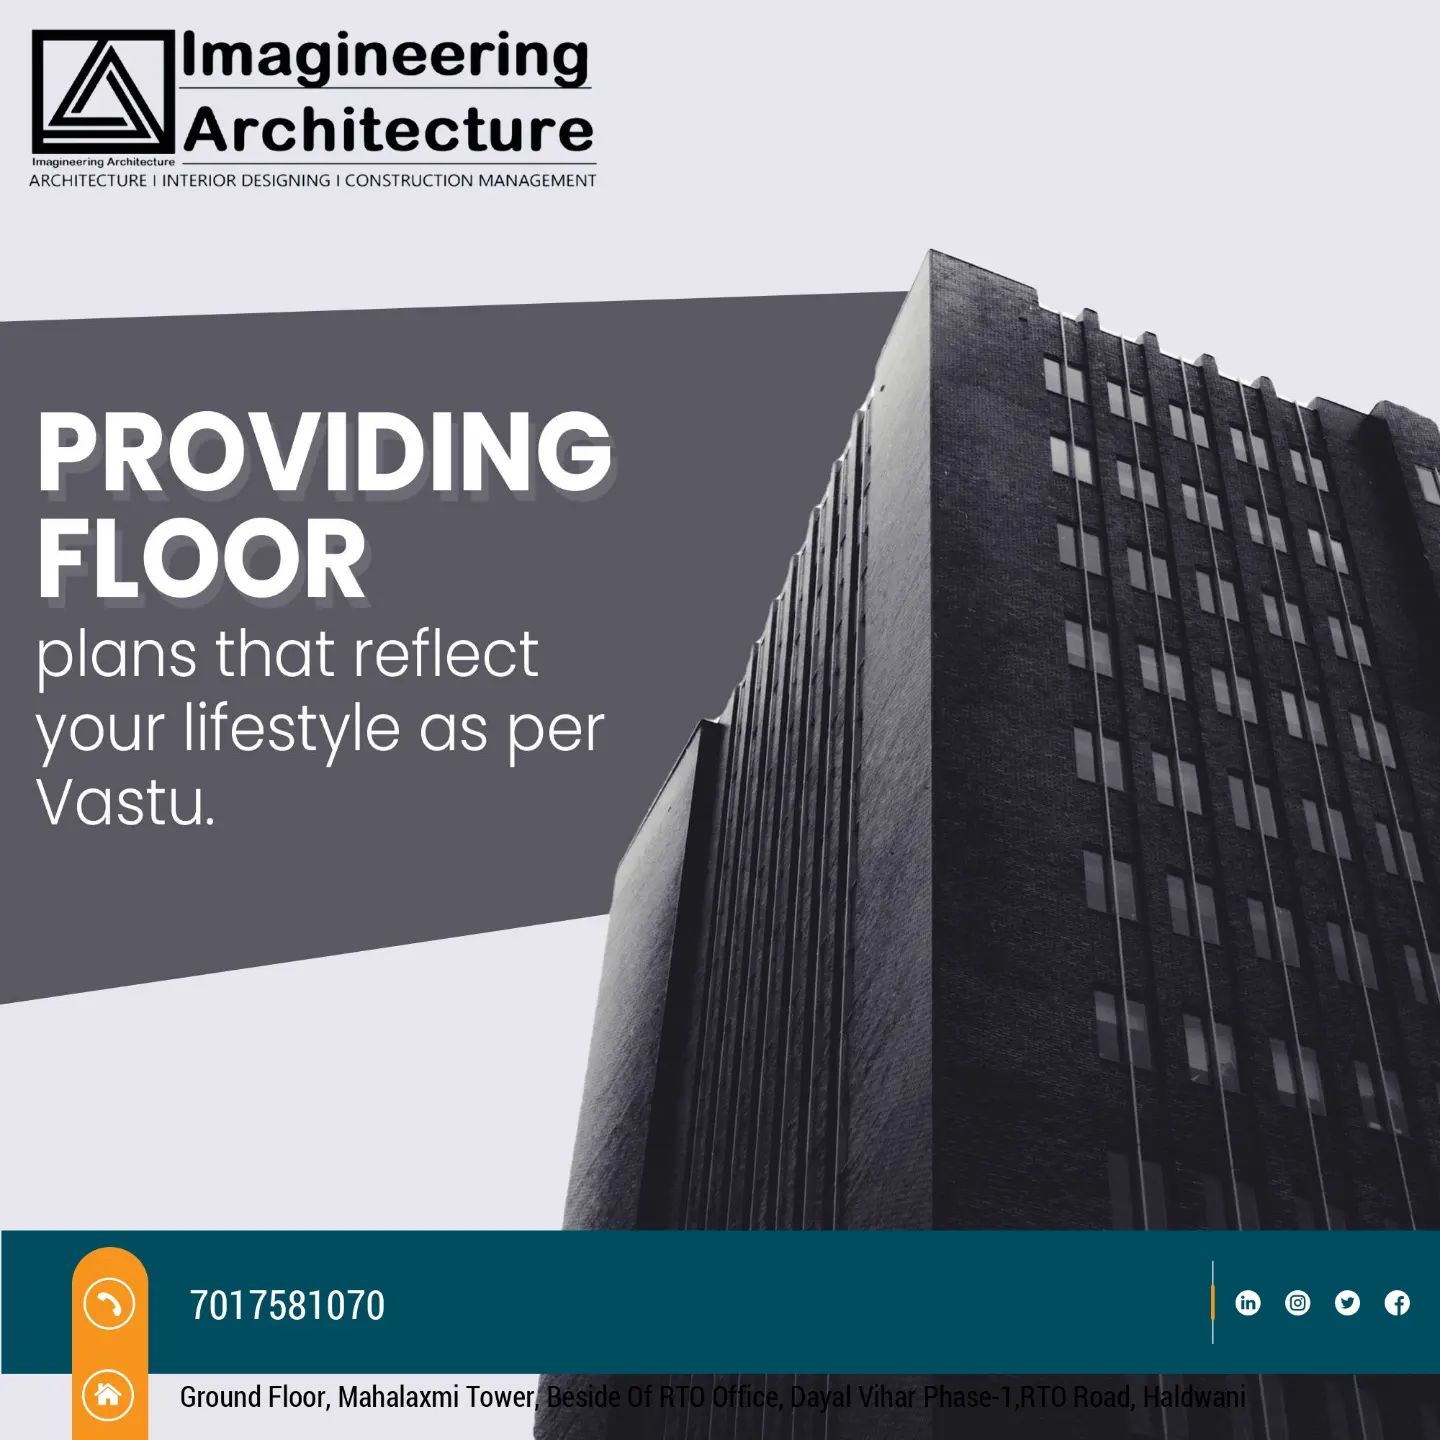 IMAGINEERING ARCHITECTURE|Accounting Services|Professional Services